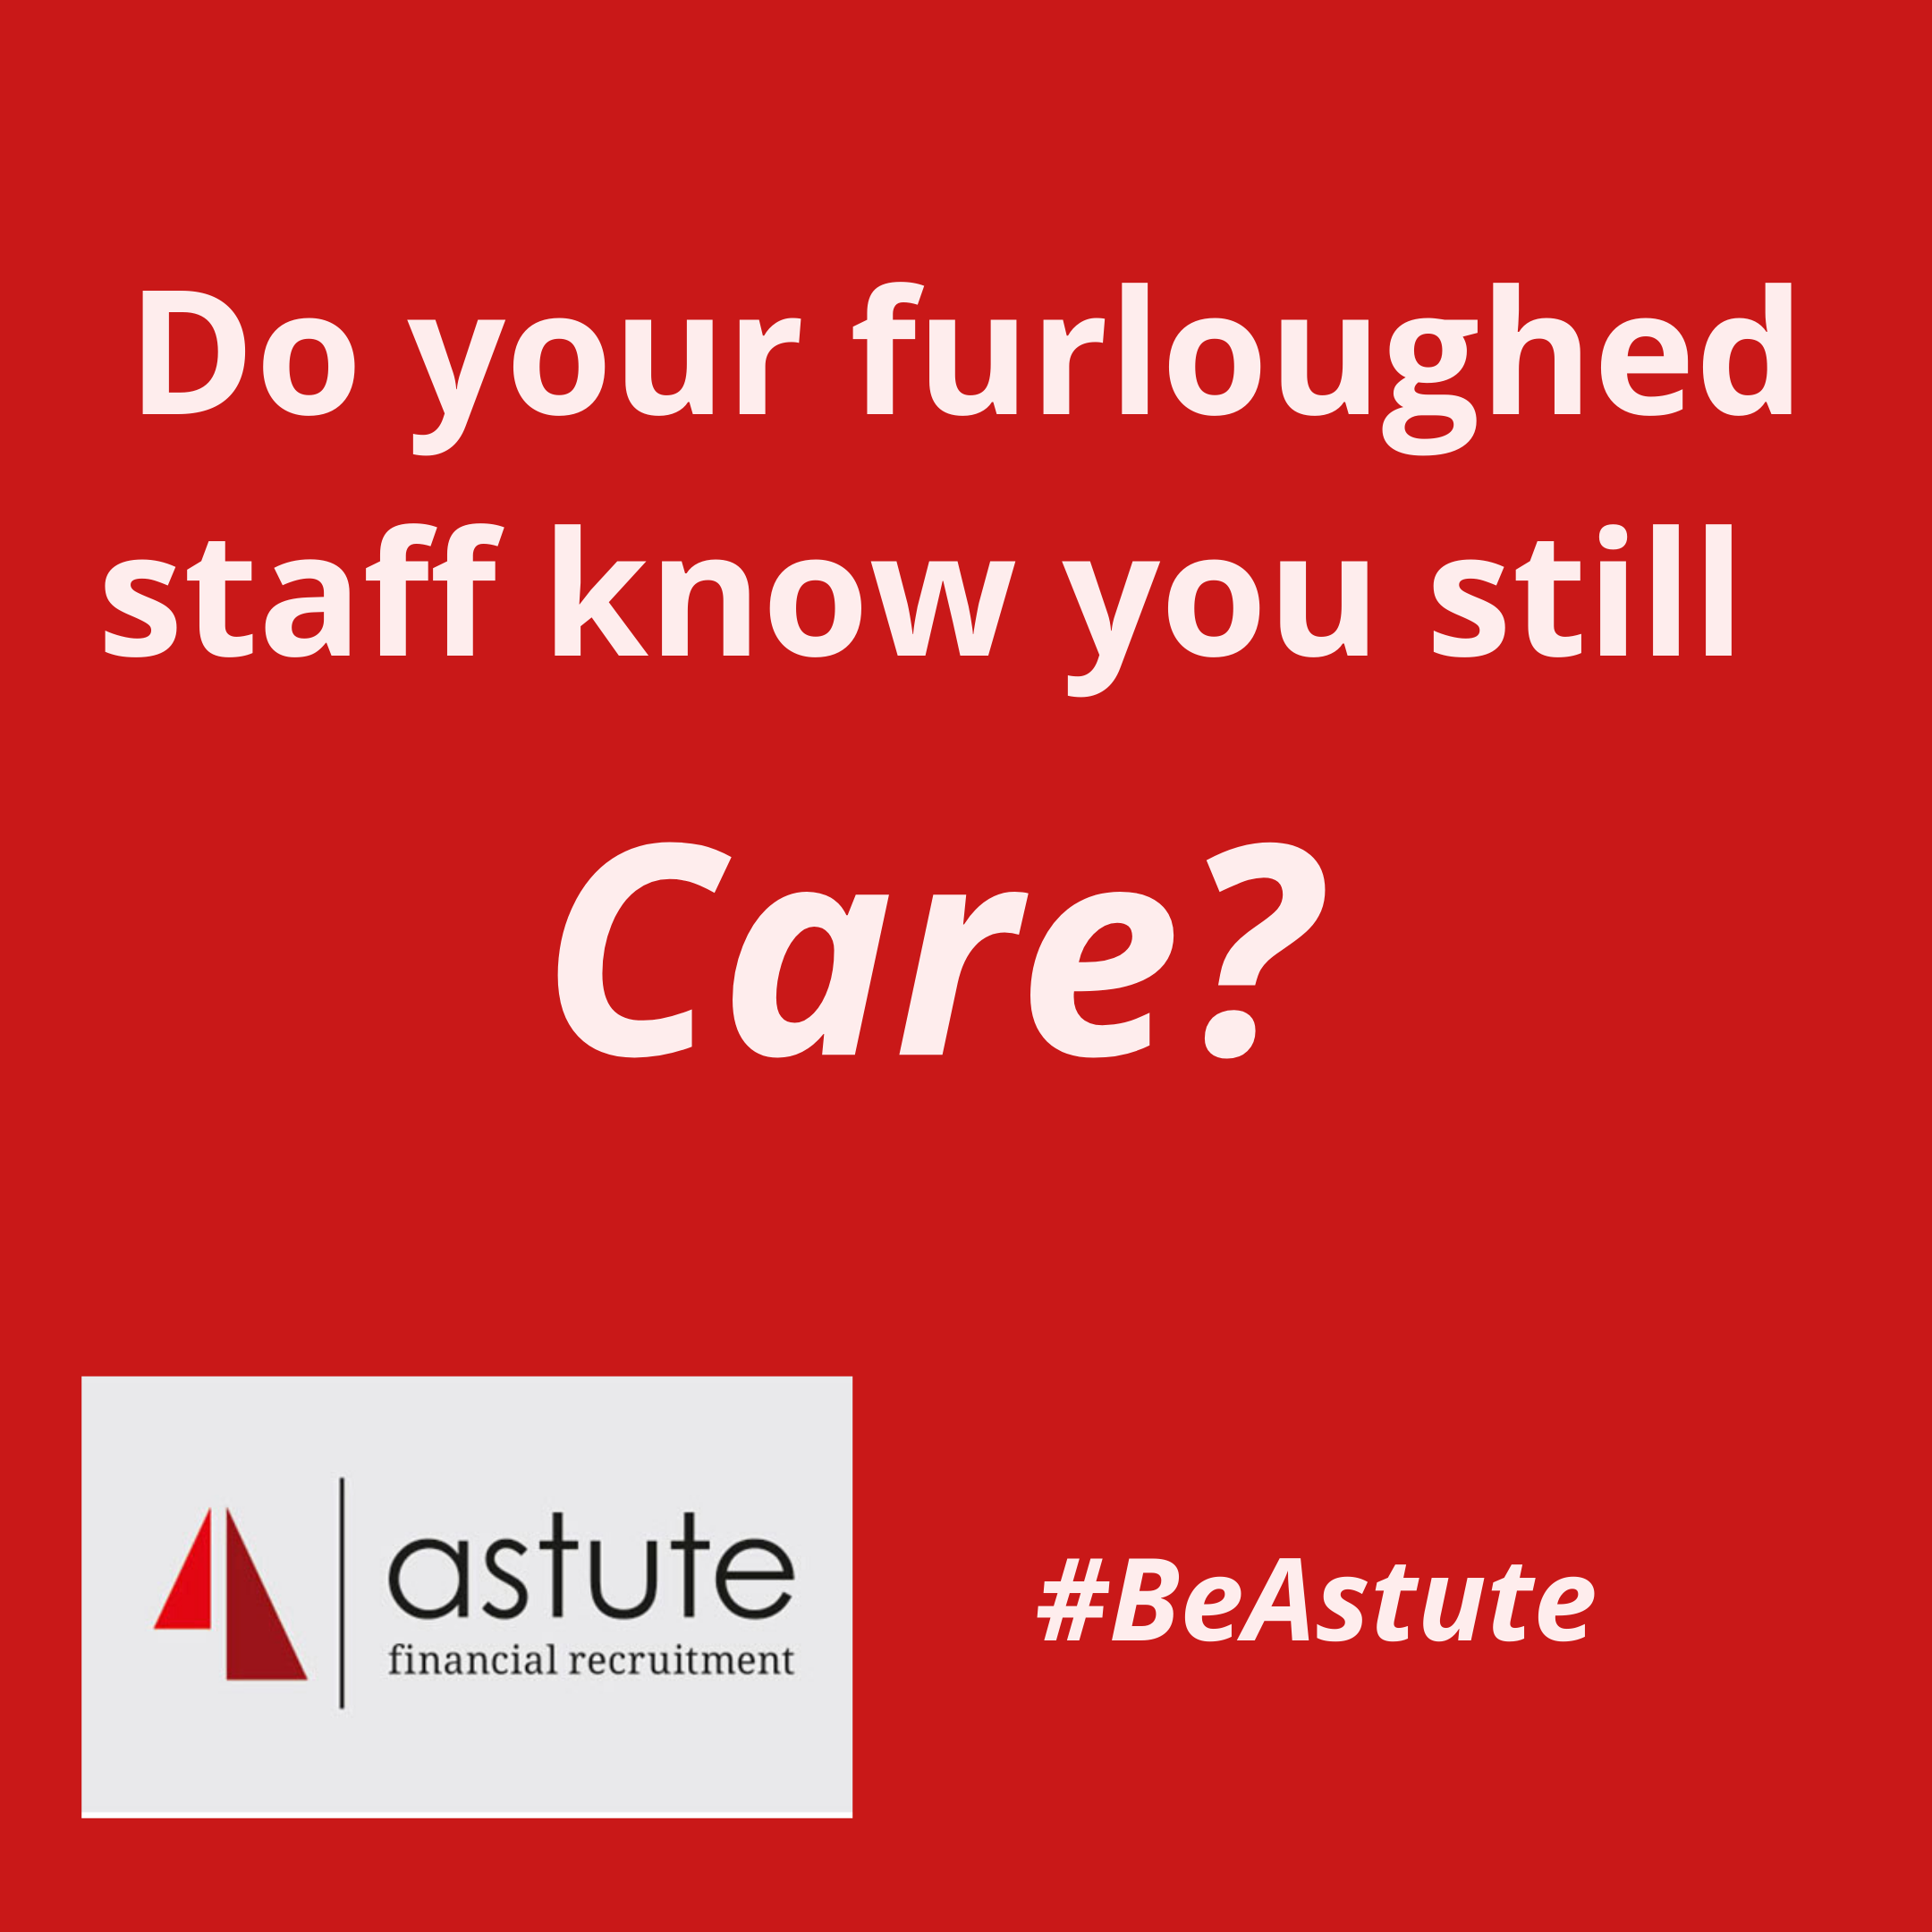 Do your furloughed staff know you still care?